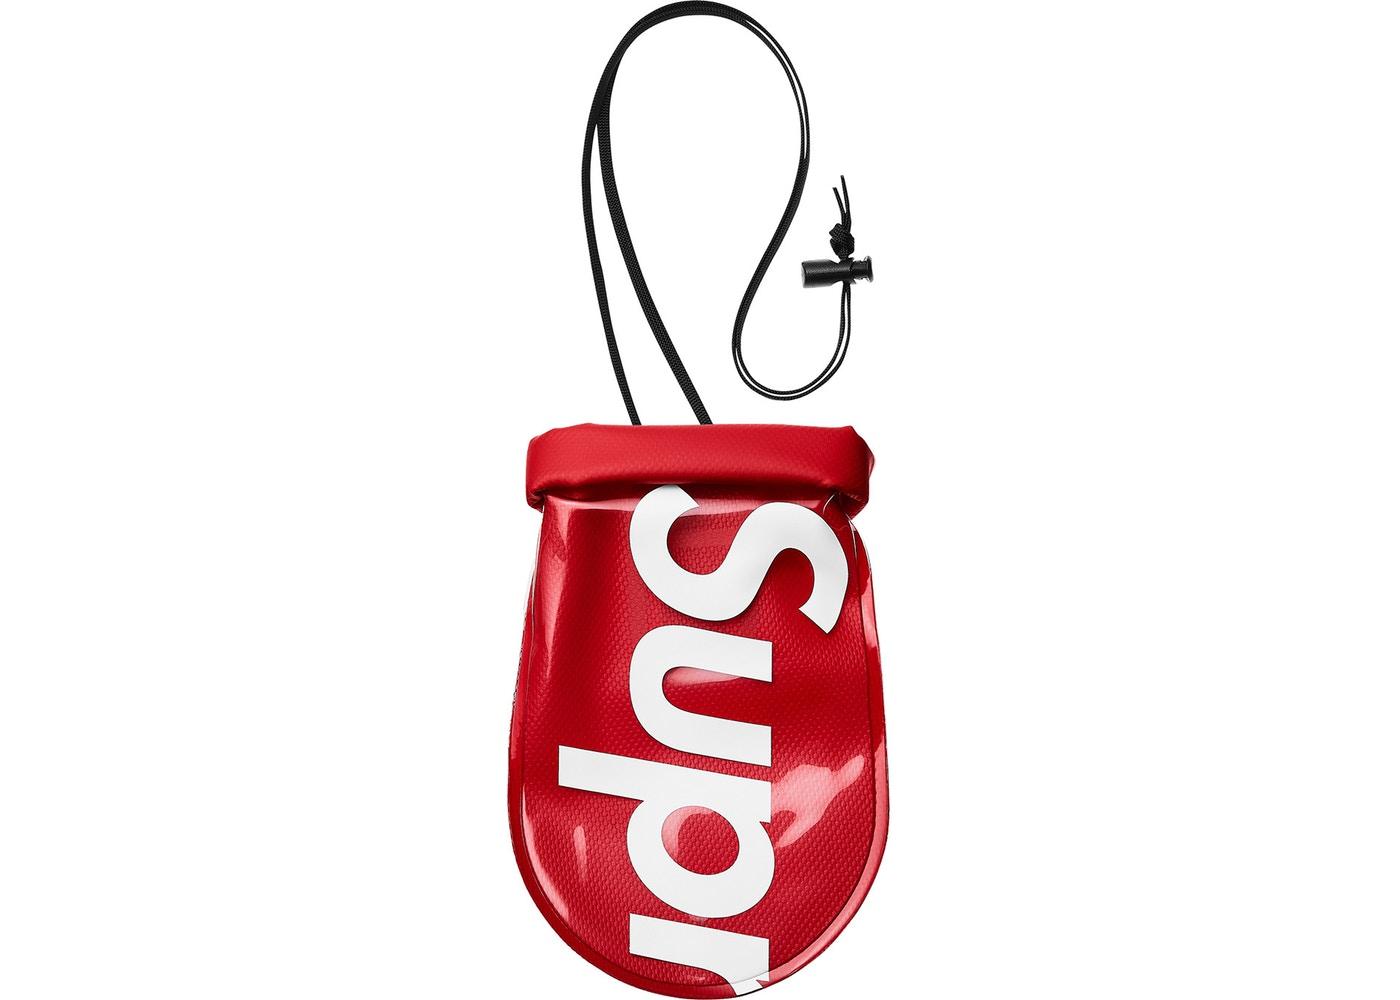 Supreme sealline see pouch large red | gualterhelicopteros.com.br